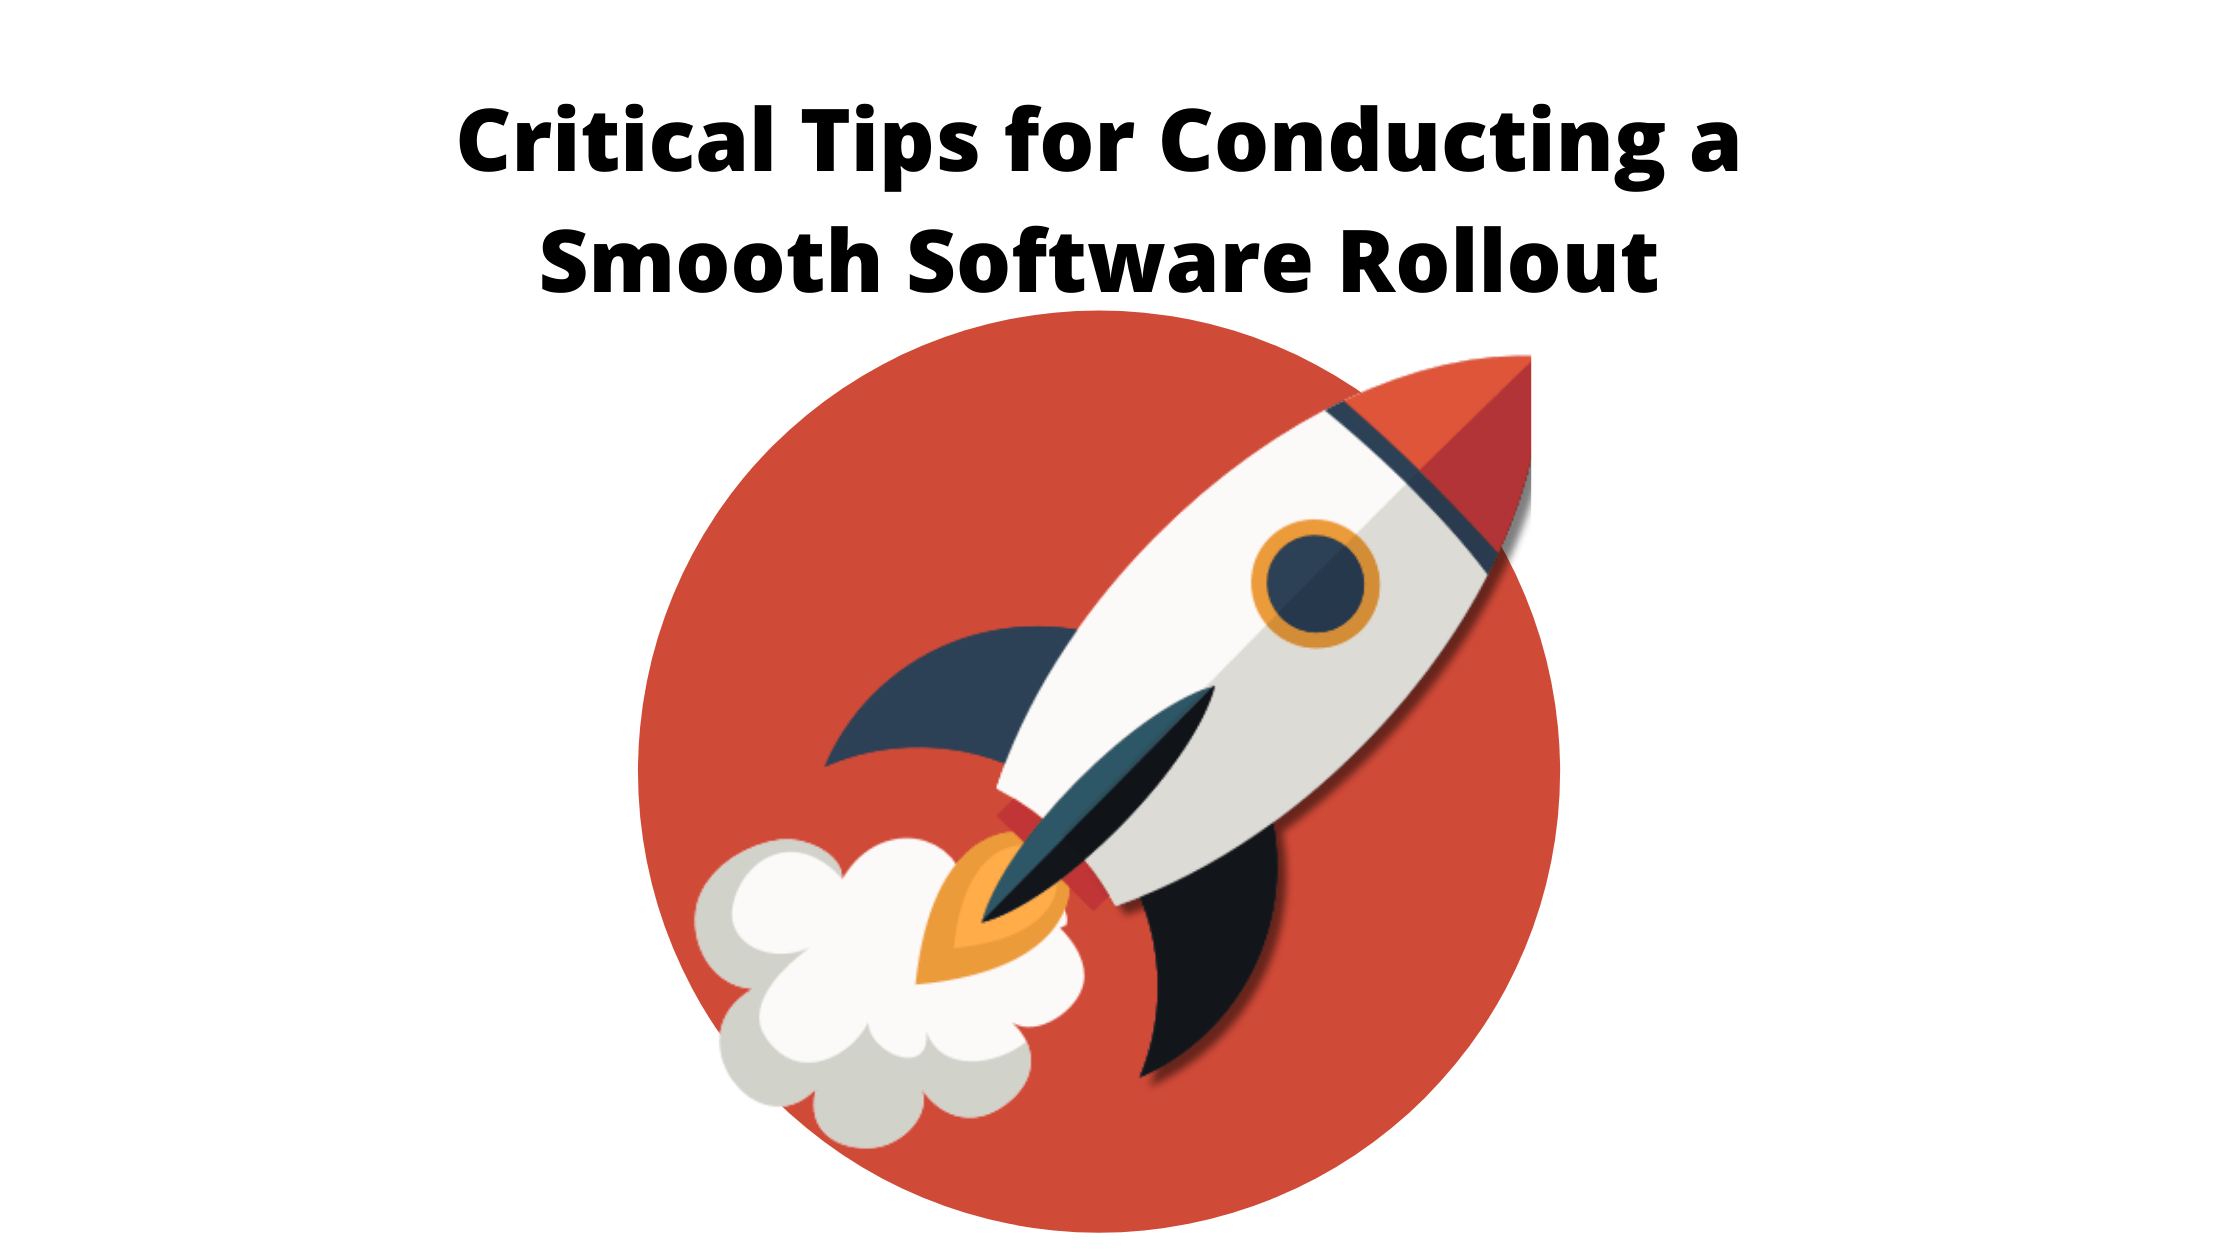 Critical tips for conducting a smooth software rollout